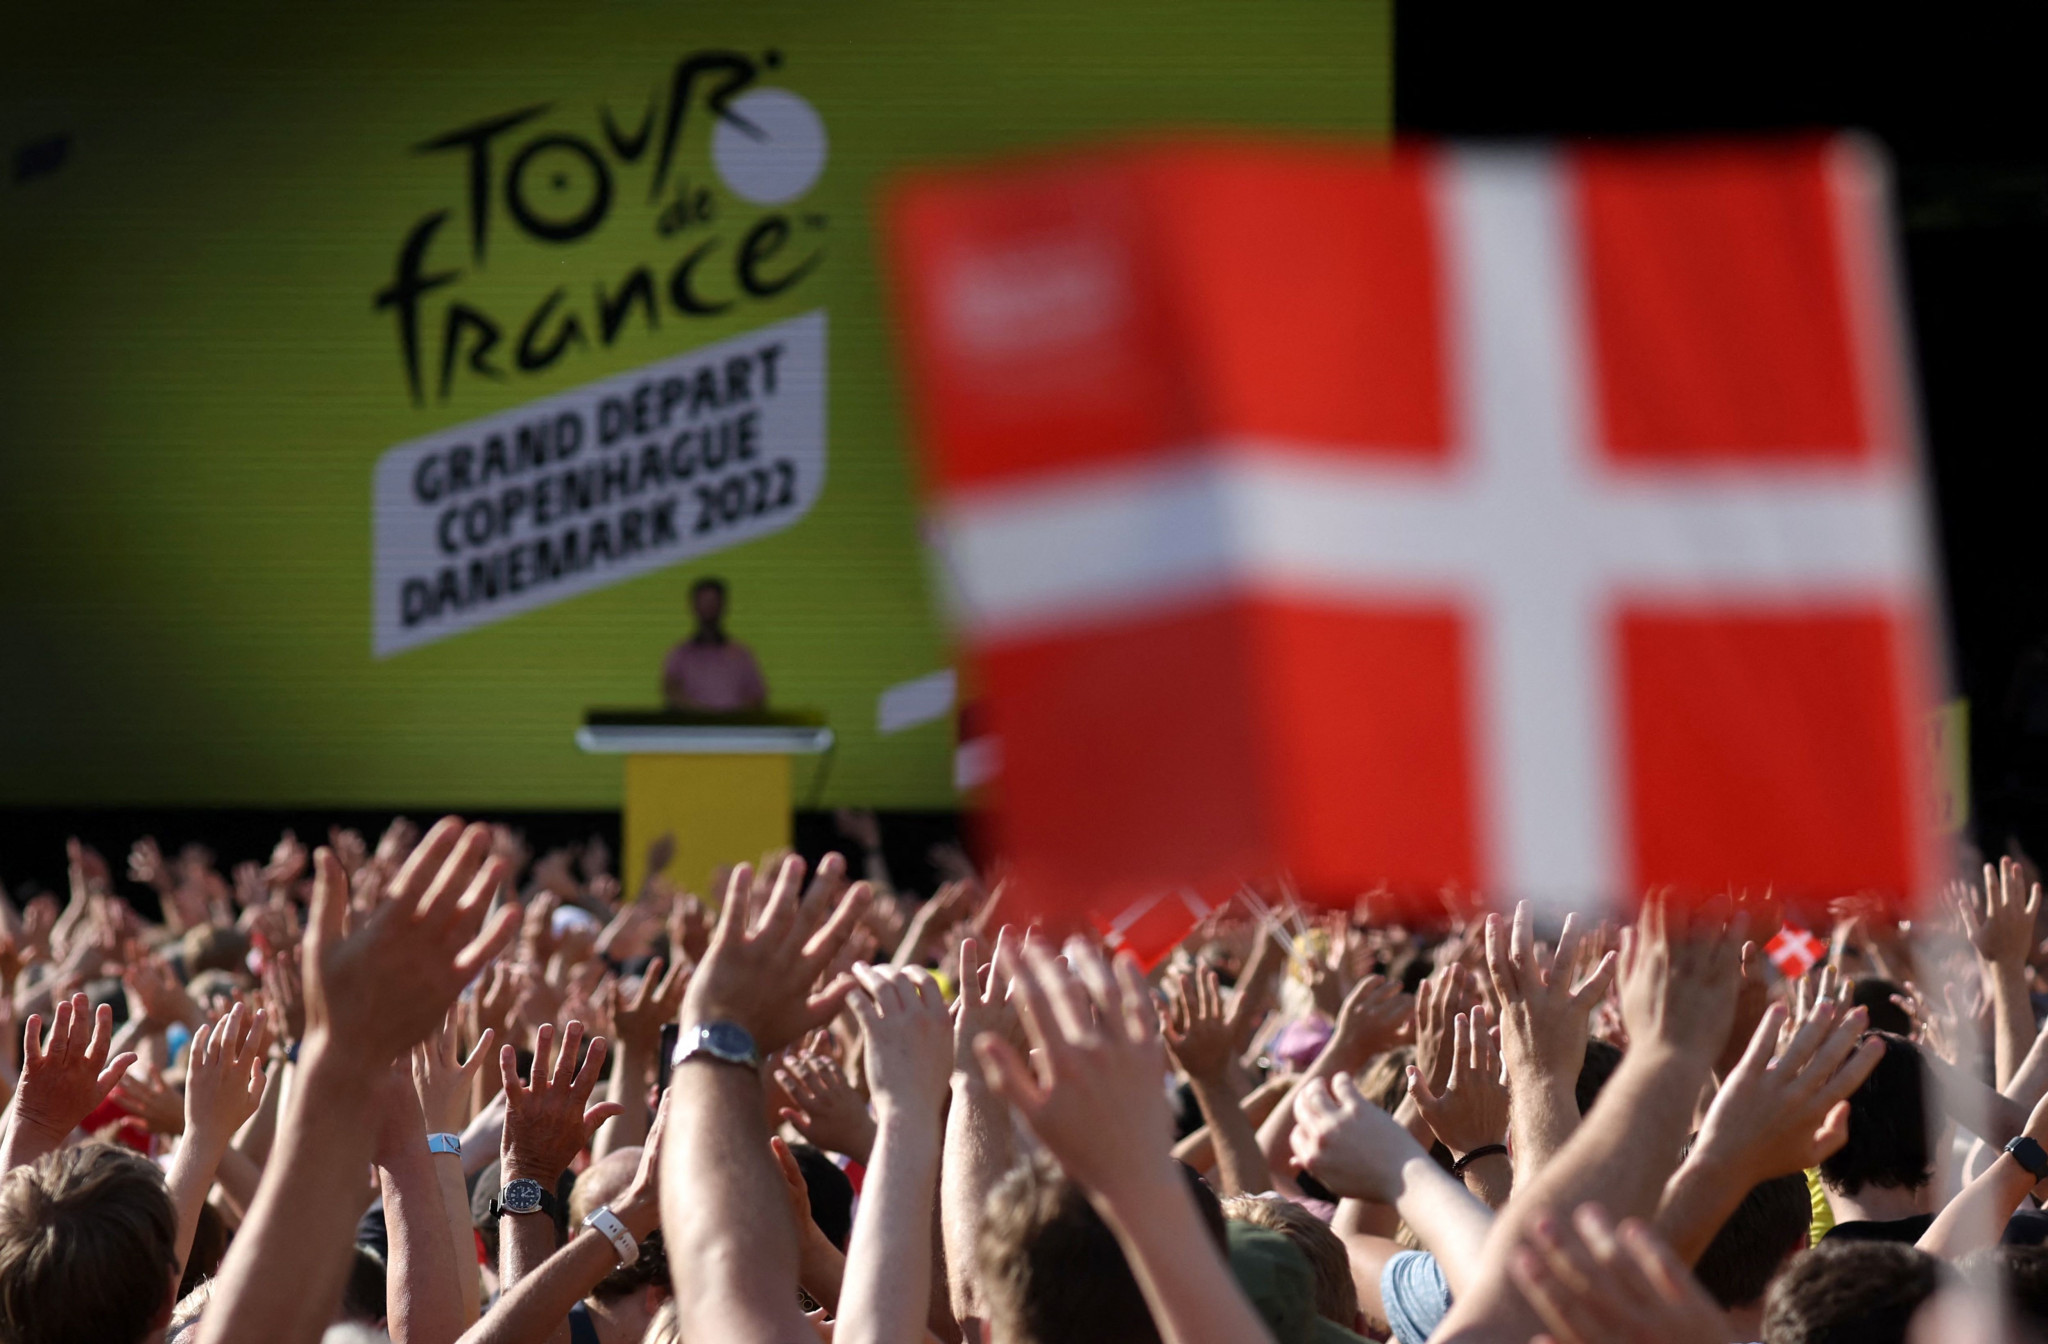 Denmark's hosting of the Grand Départ was a net positive, according to organisers ©Getty Images